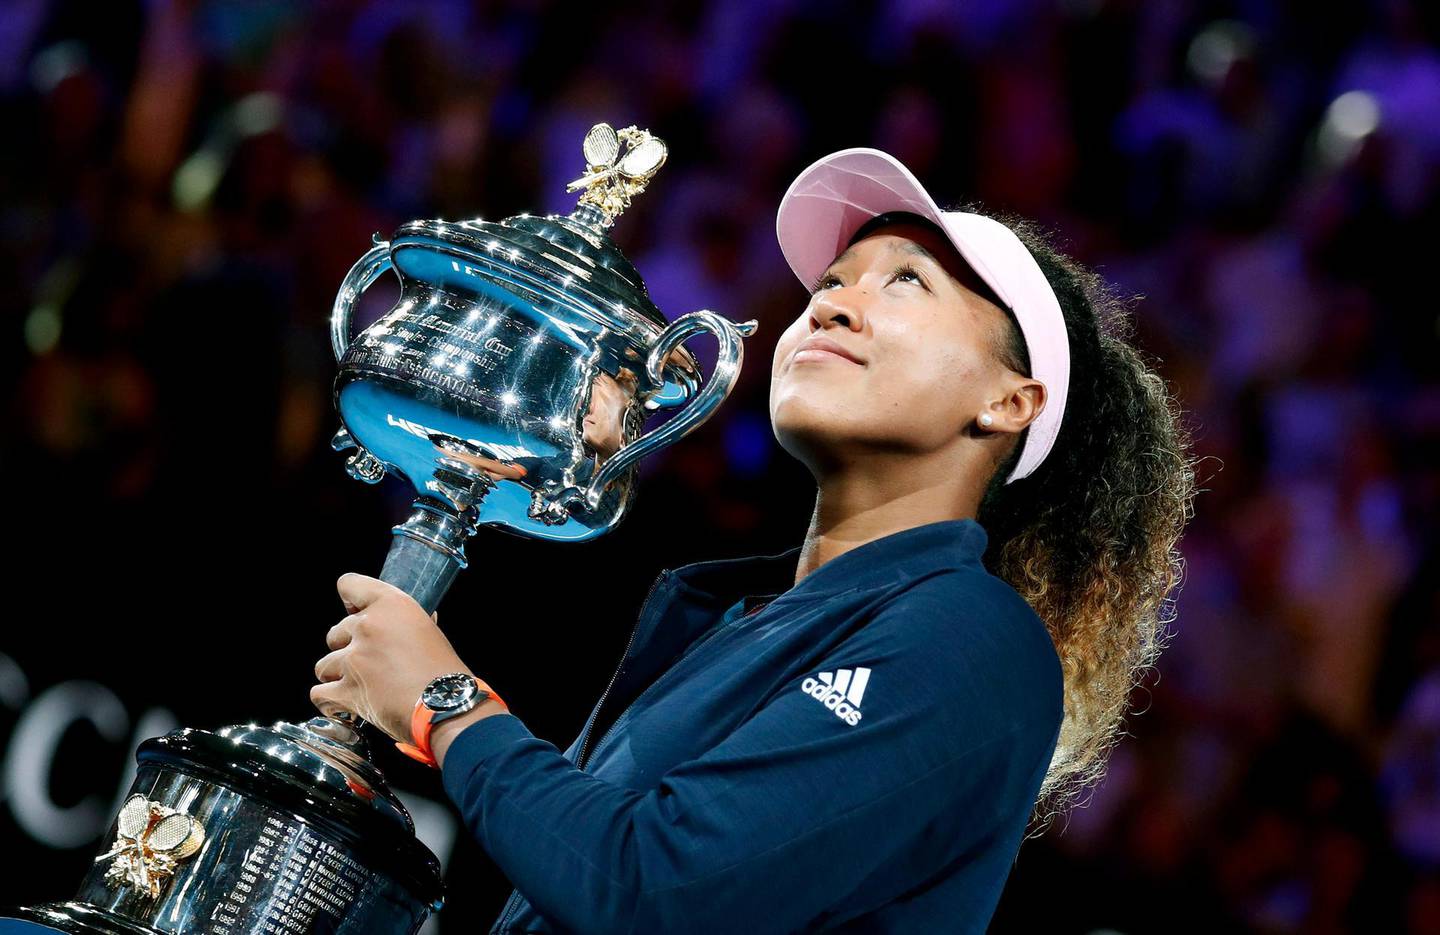 epaselect epa07321174 Naomi Osaka of Japan poses for photos with her trophy after winning the women's singles final match against Petra Kvitova of Czech Republic at the Australian Open Grand Slam tennis tournament in Melbourne, Australia, 26 January 2019.  EPA/RITCHIE TONGO